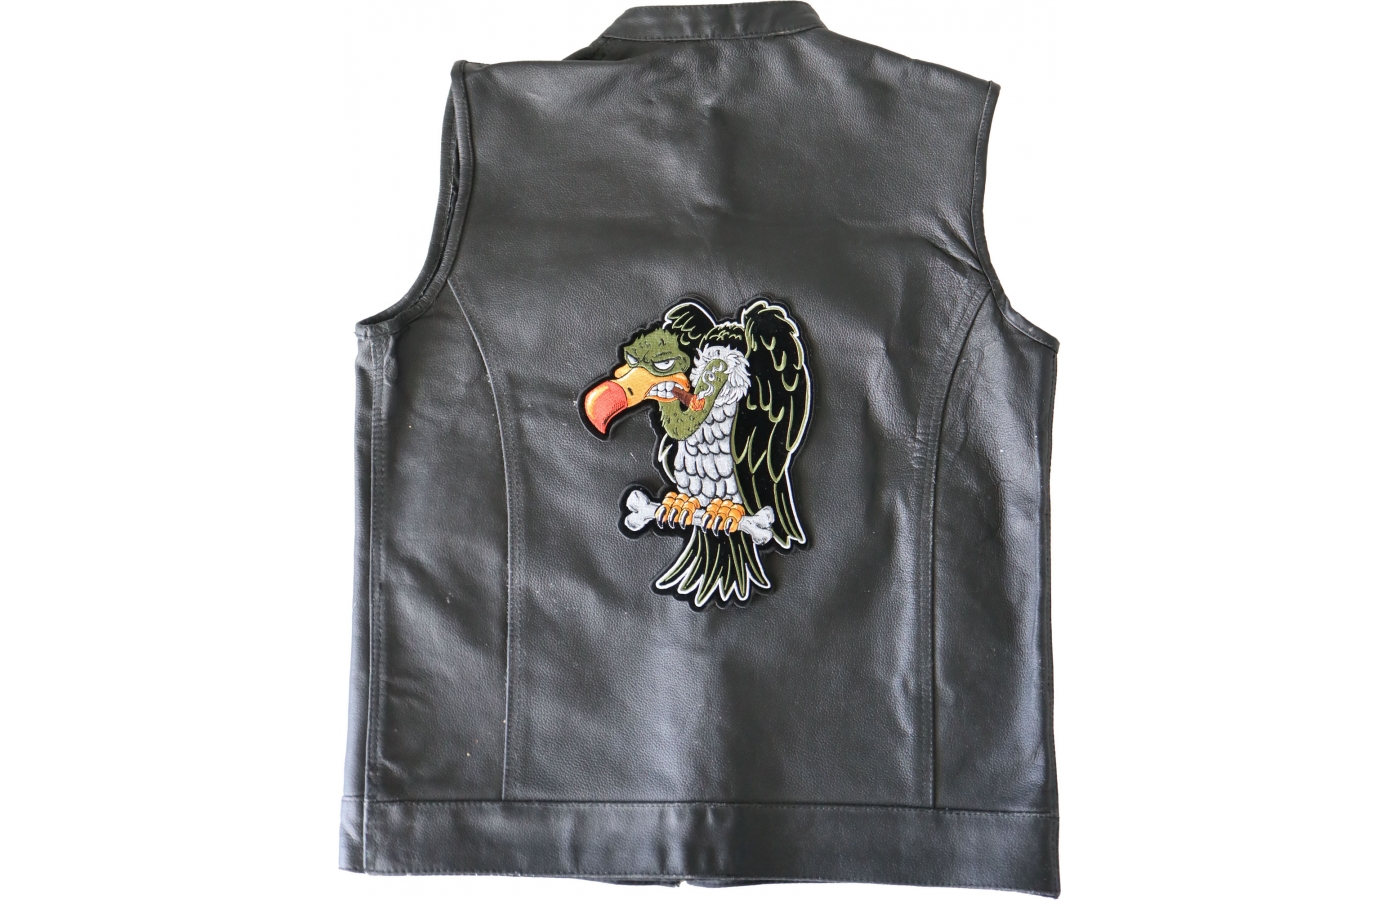 Large Vulture Patch for Back of Biker Jackets by Ivamis Patches